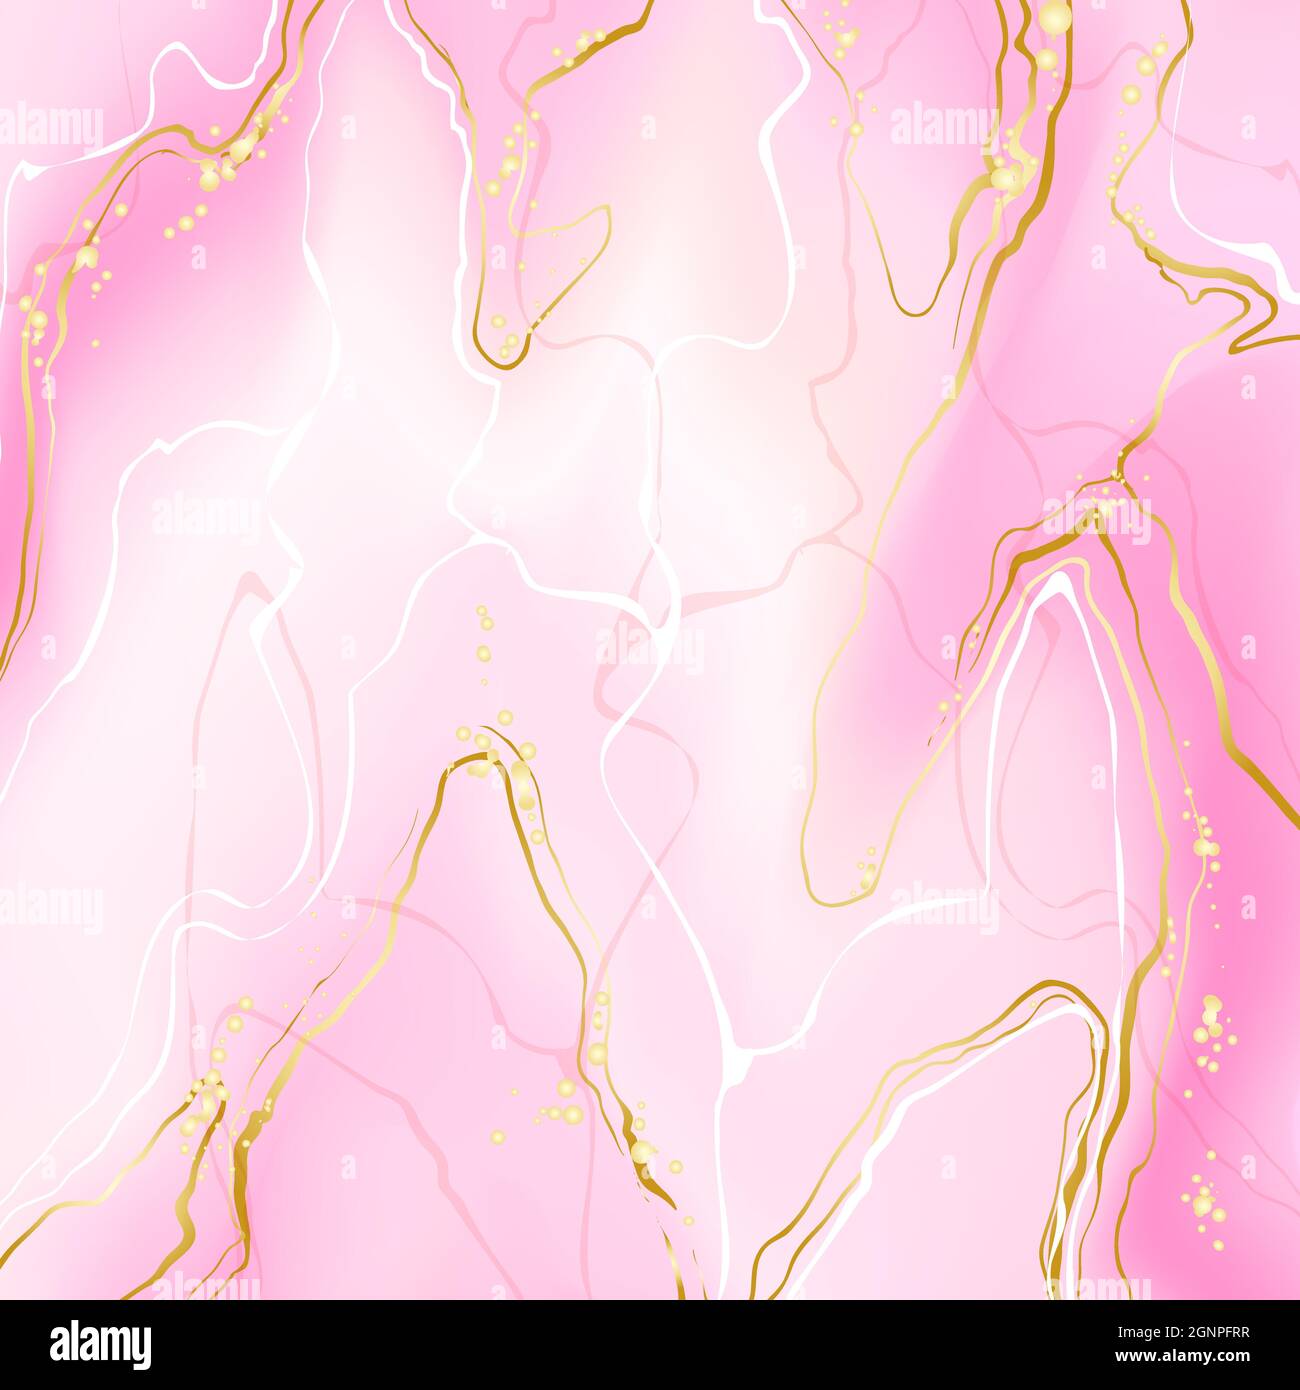 Pink marble tile Stock Vector